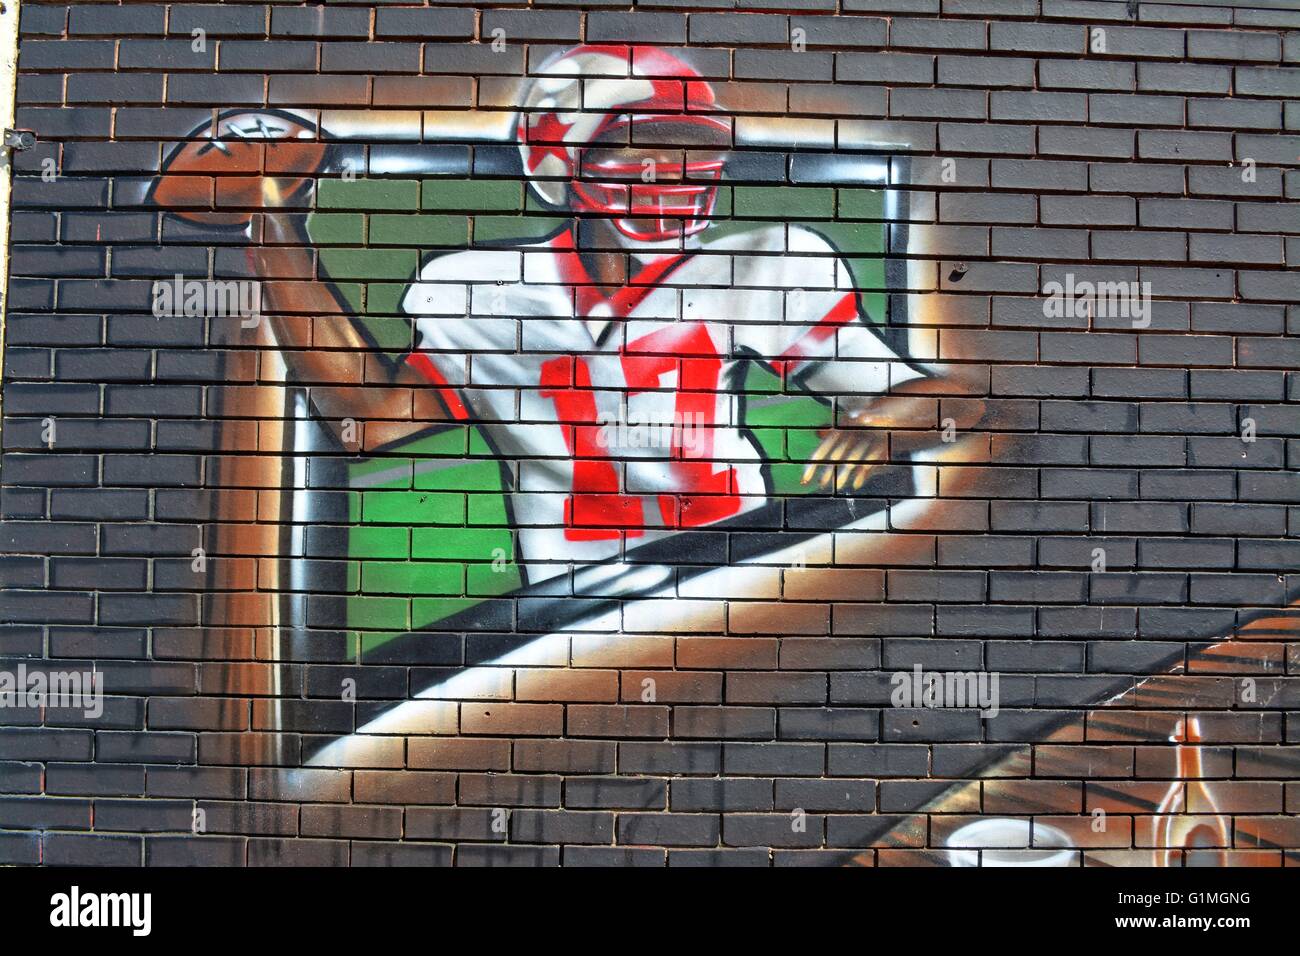 Graffiti in Wales, nationale Rugby-Spieler Graffiti an einer Hauswand Stockfoto